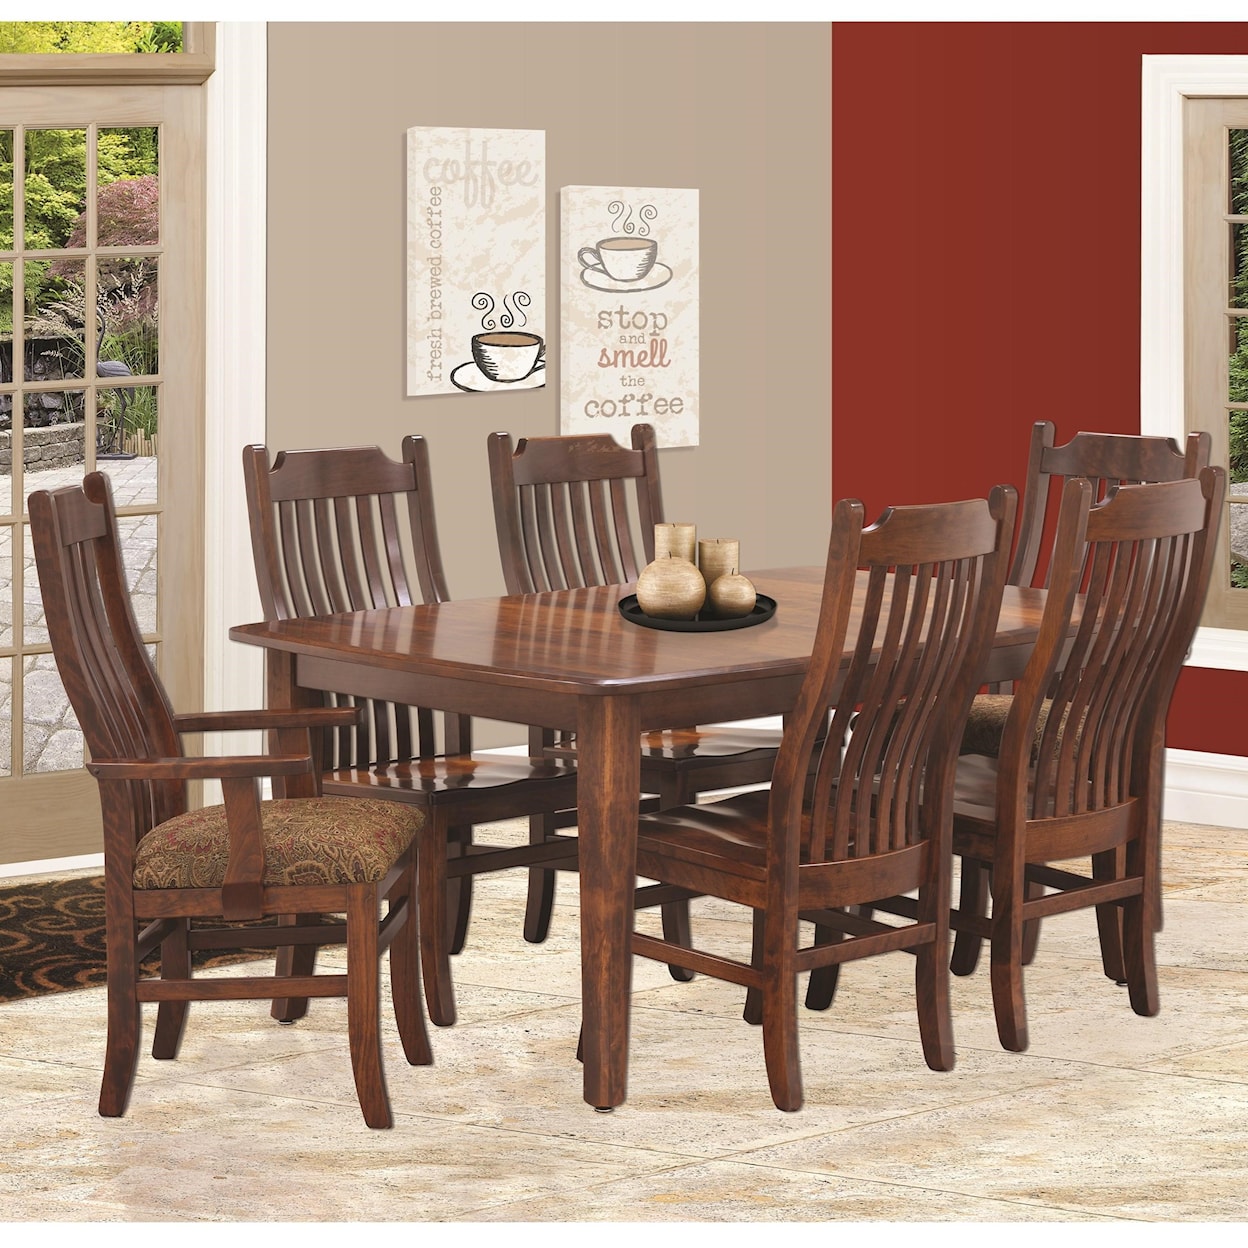 Trailway Amish Wood Easton Pike 7 Piece Dining Set